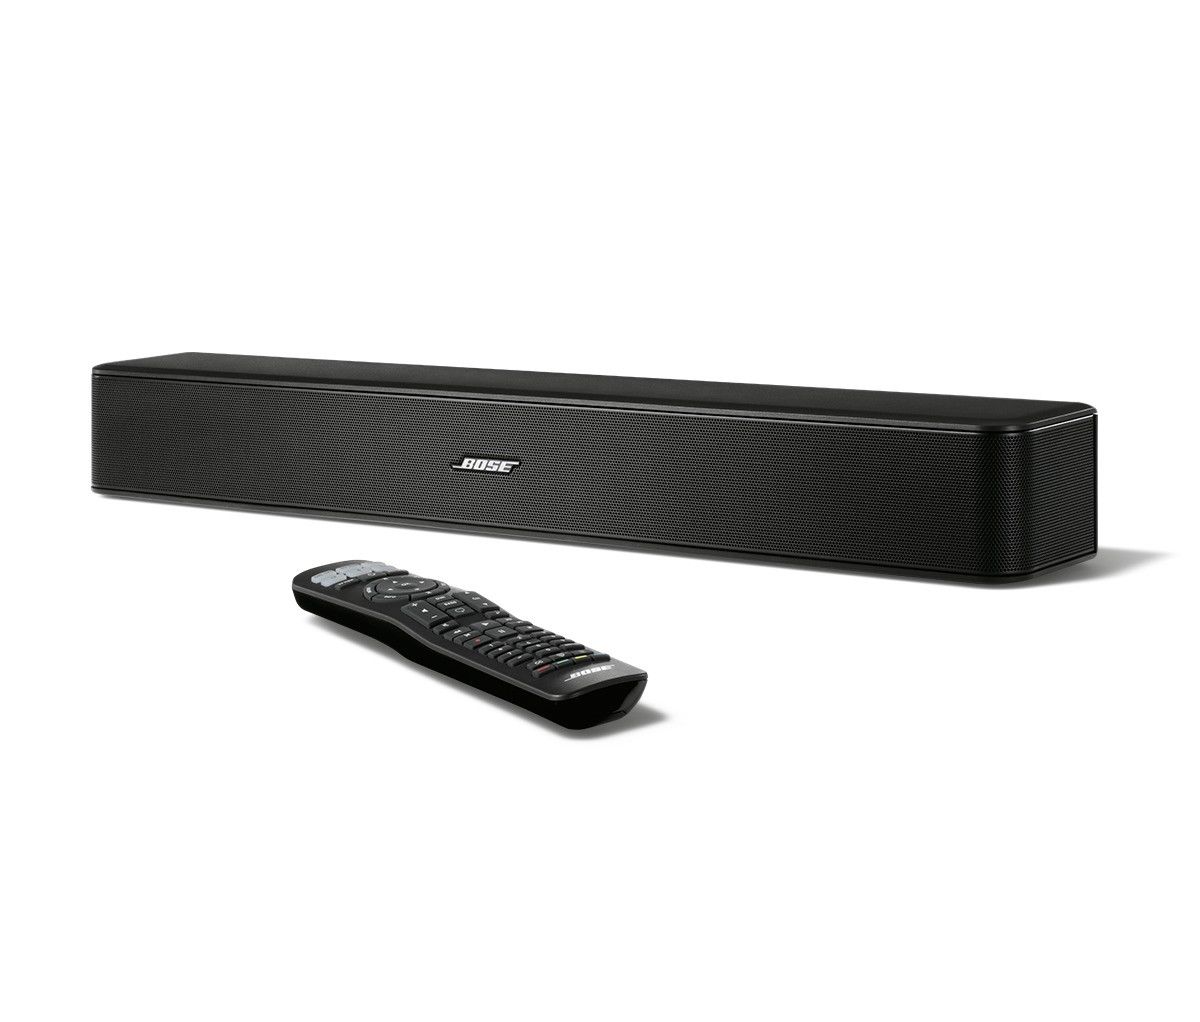 Bose refurbished Solo 5 TV sound system for $120, free shipping